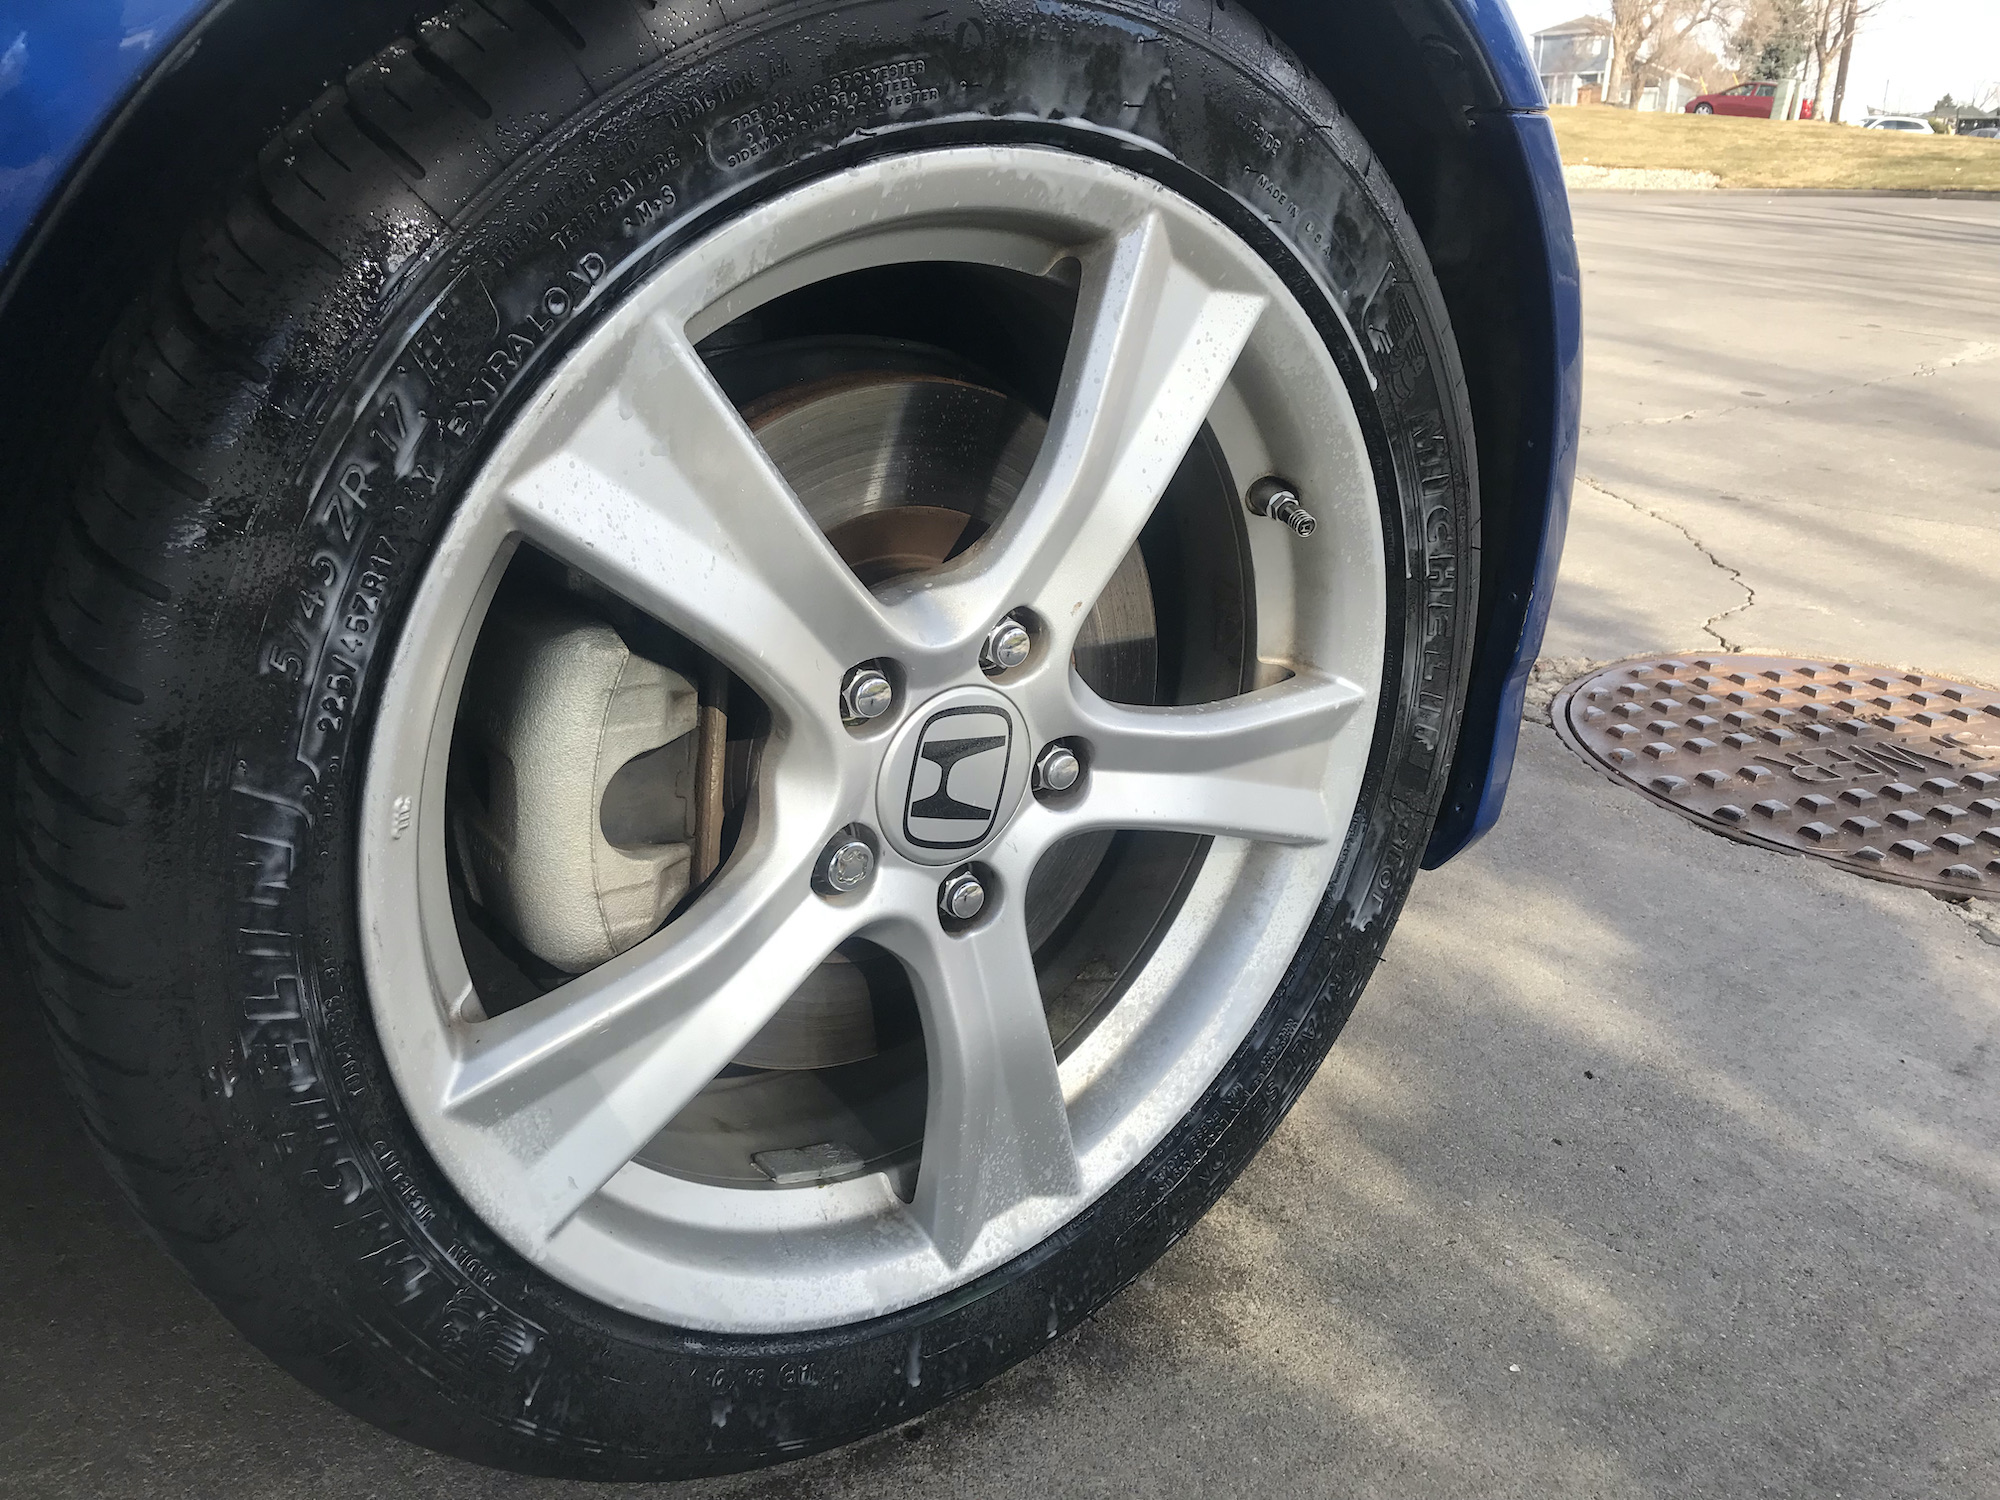 Tire shine sprayed directly on a tire